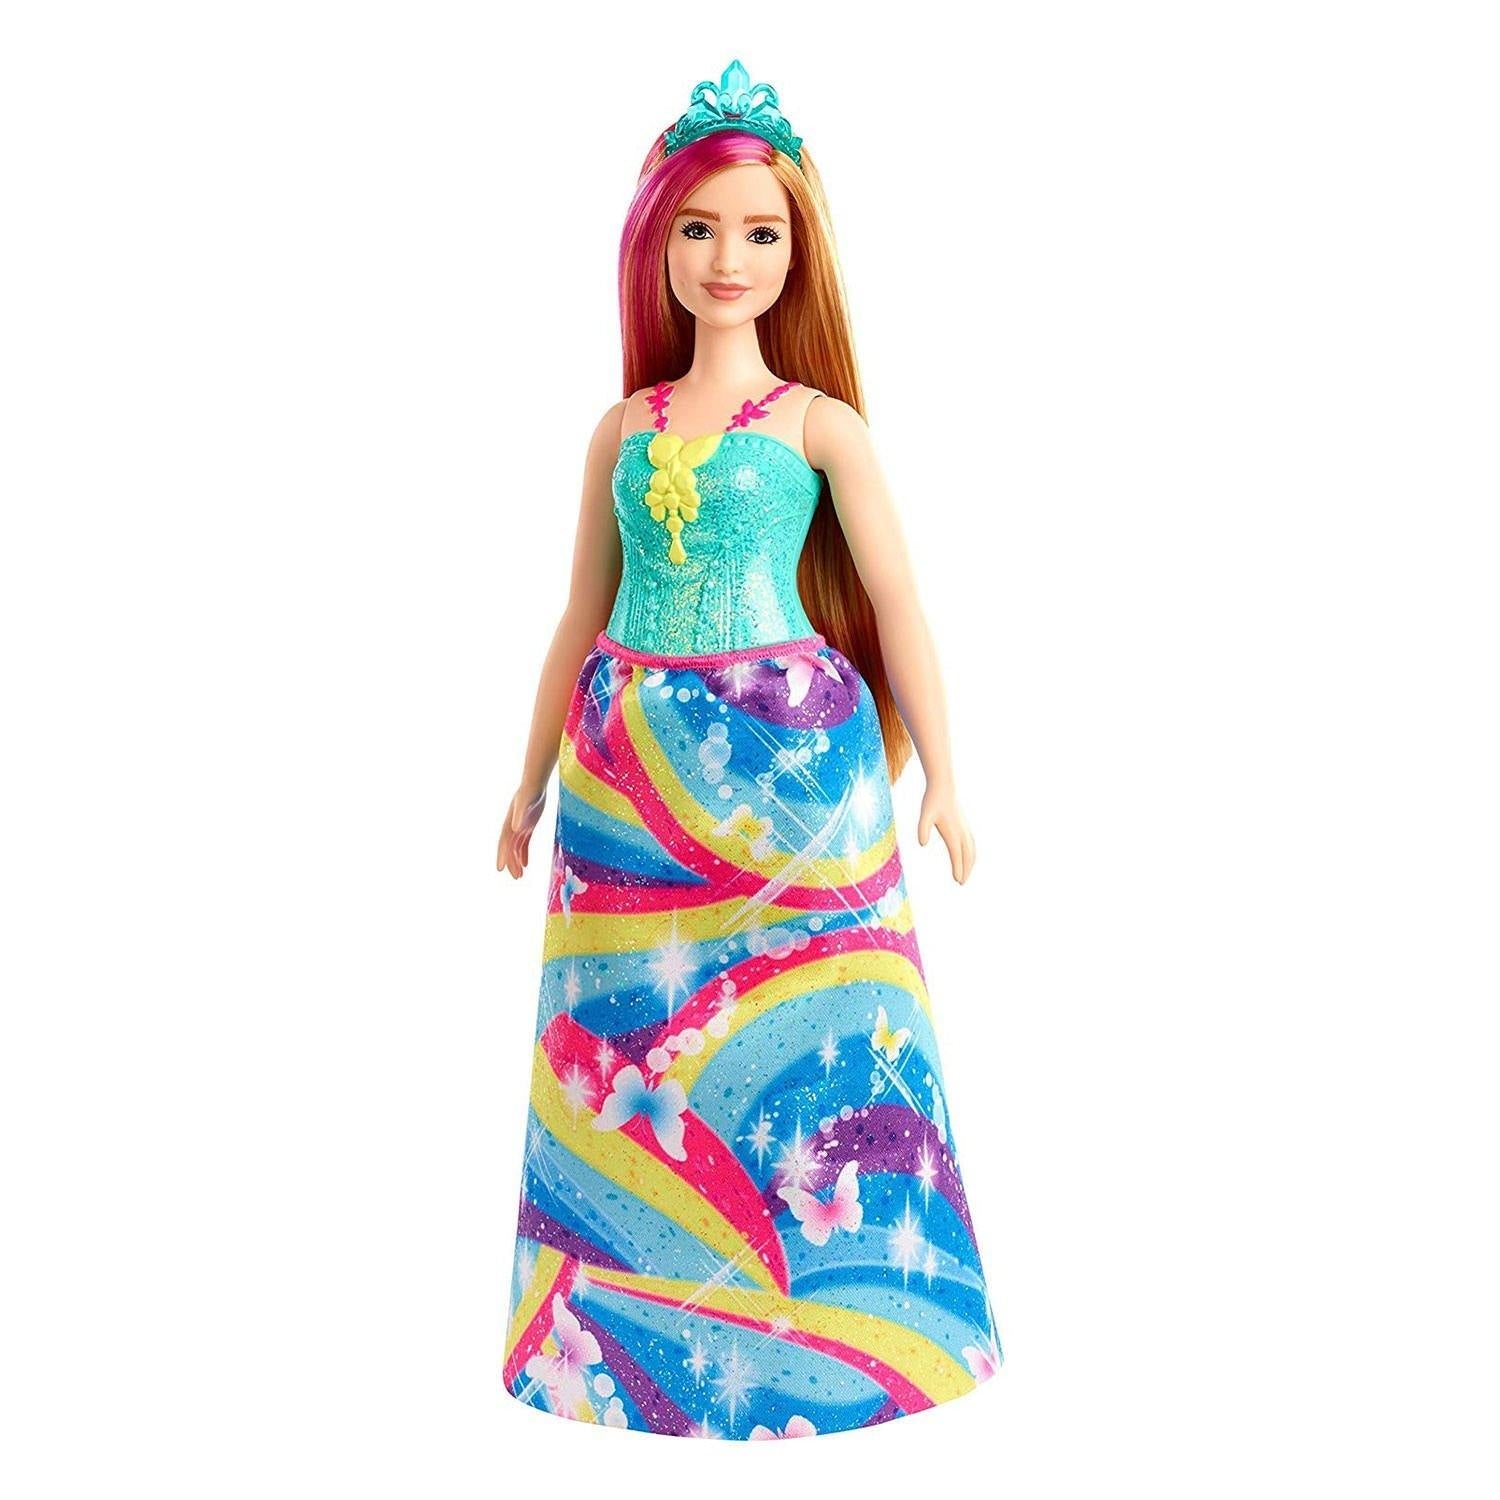 Barbie Dreamtopia Princess Strawberry Blonde and Pink Hair Doll